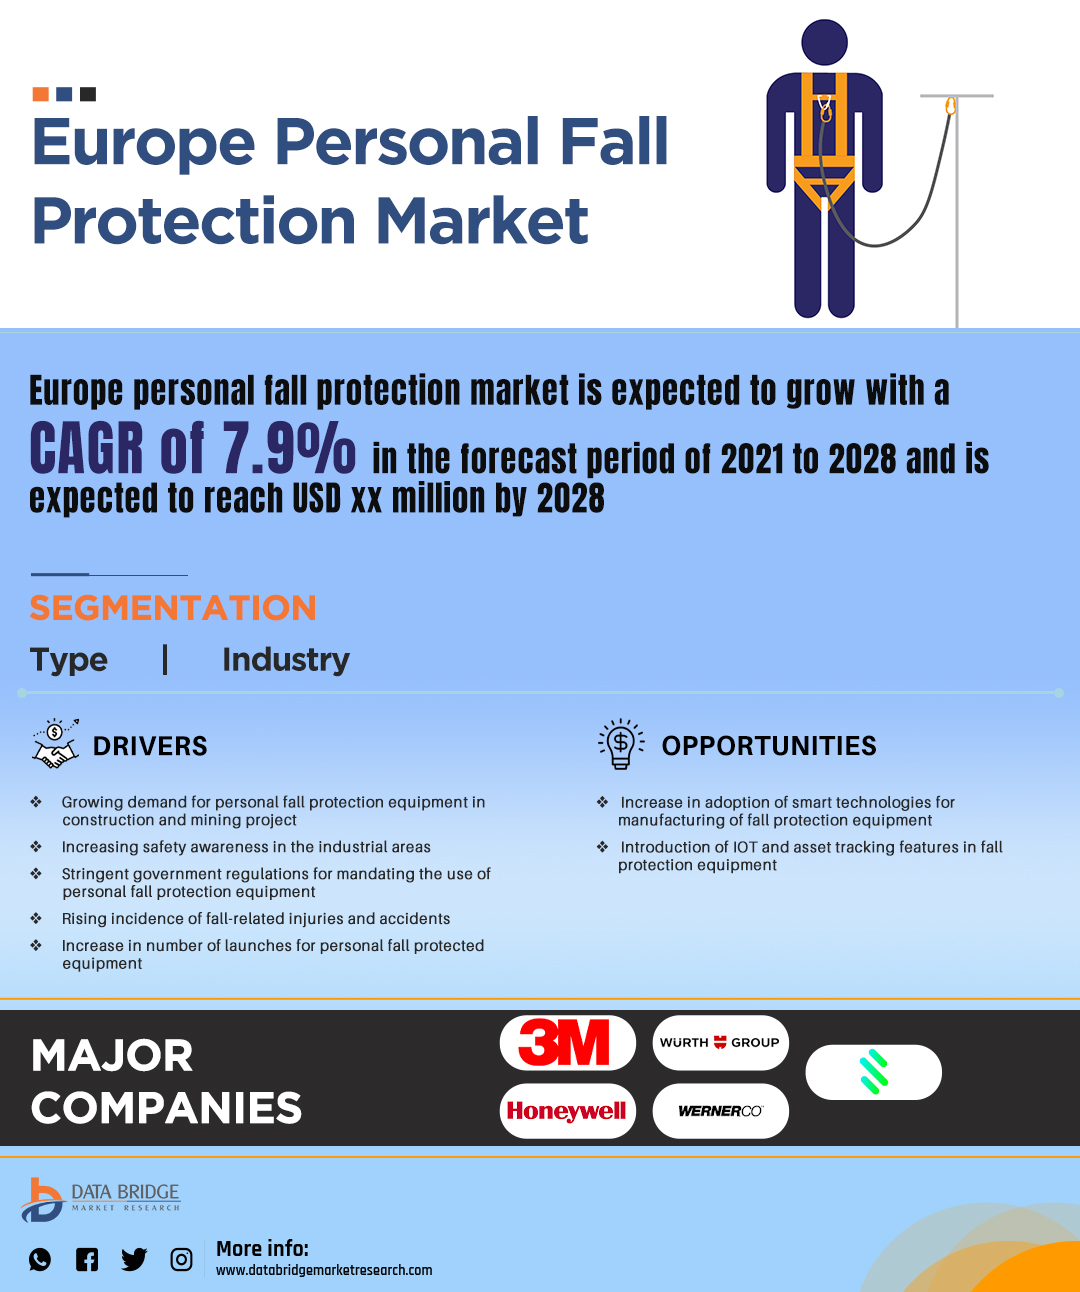 Europe Personal Fall Protection Market